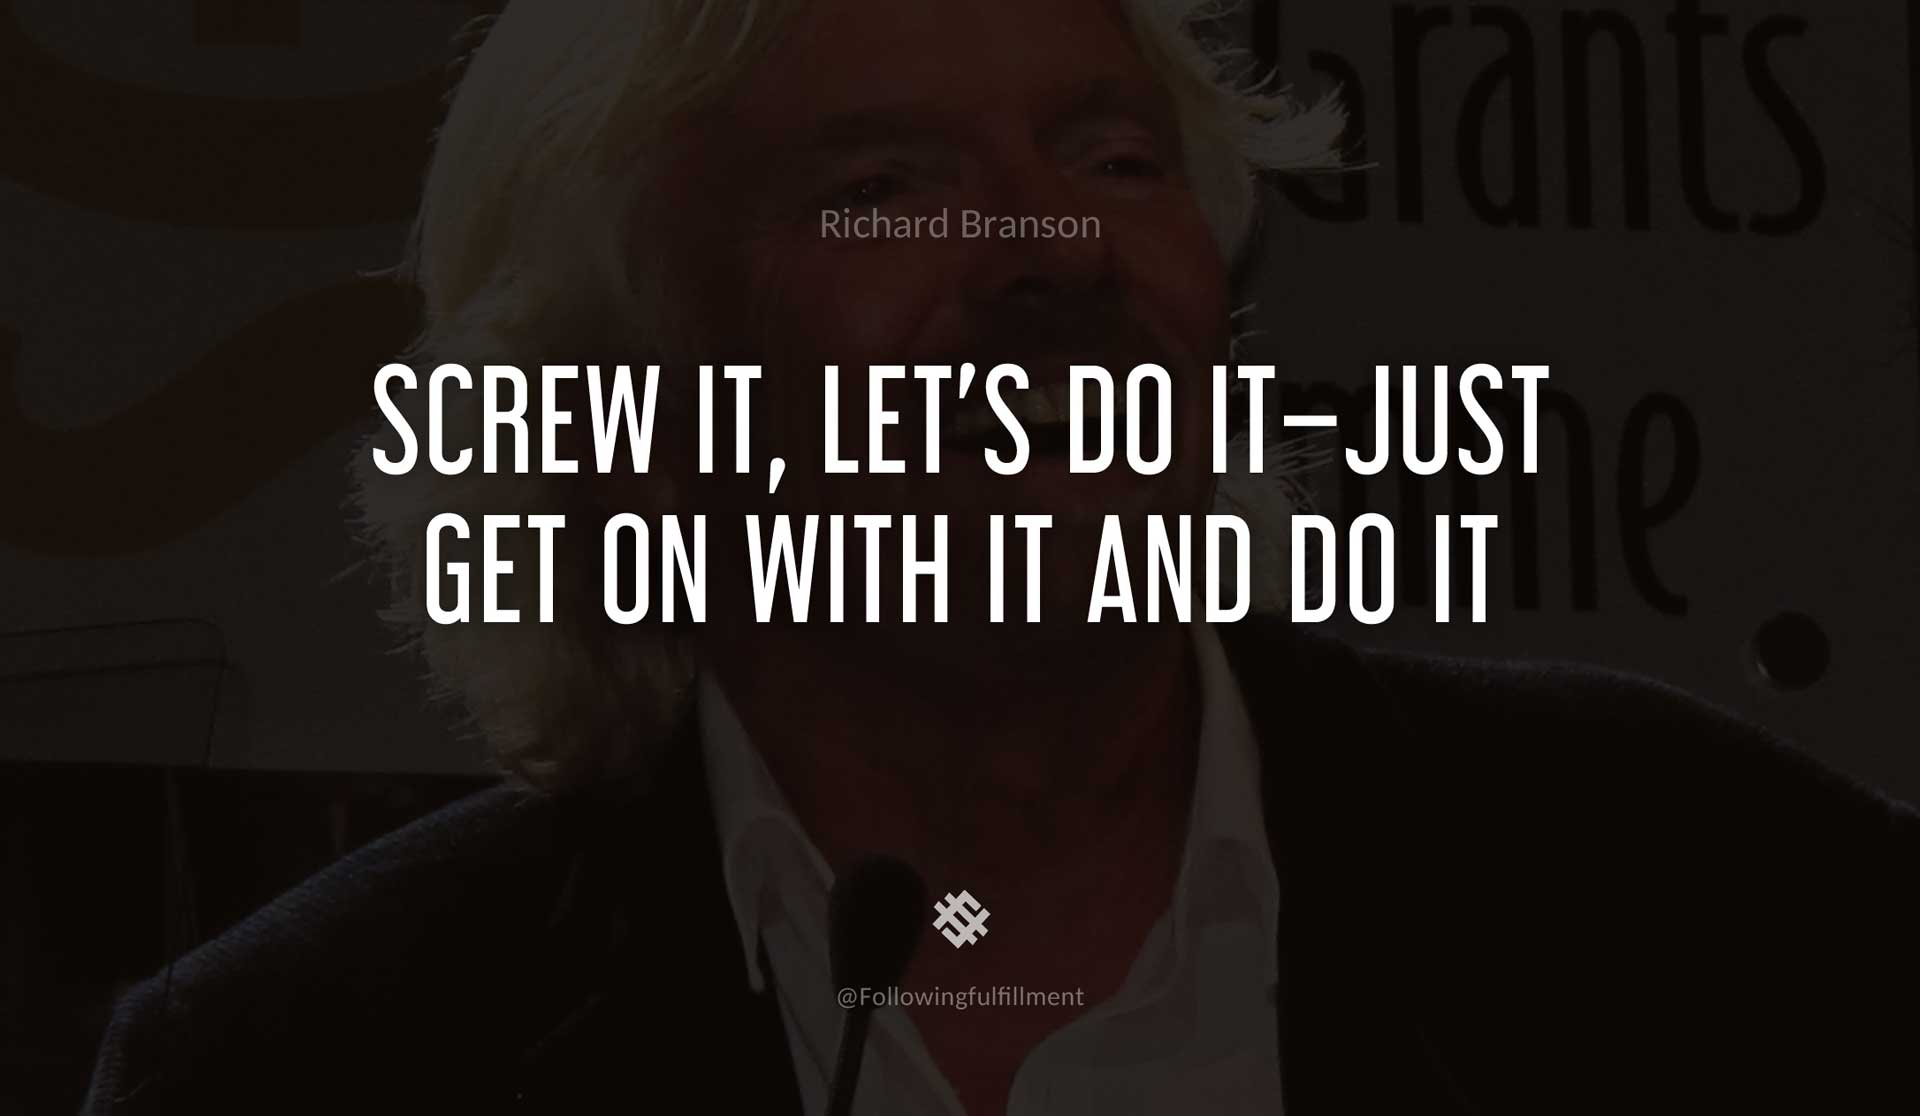 Screw-it,-let's-do-it-Just-get-on-with-it-and-do-it--RICHARD-BRANSON-Quote.jpg